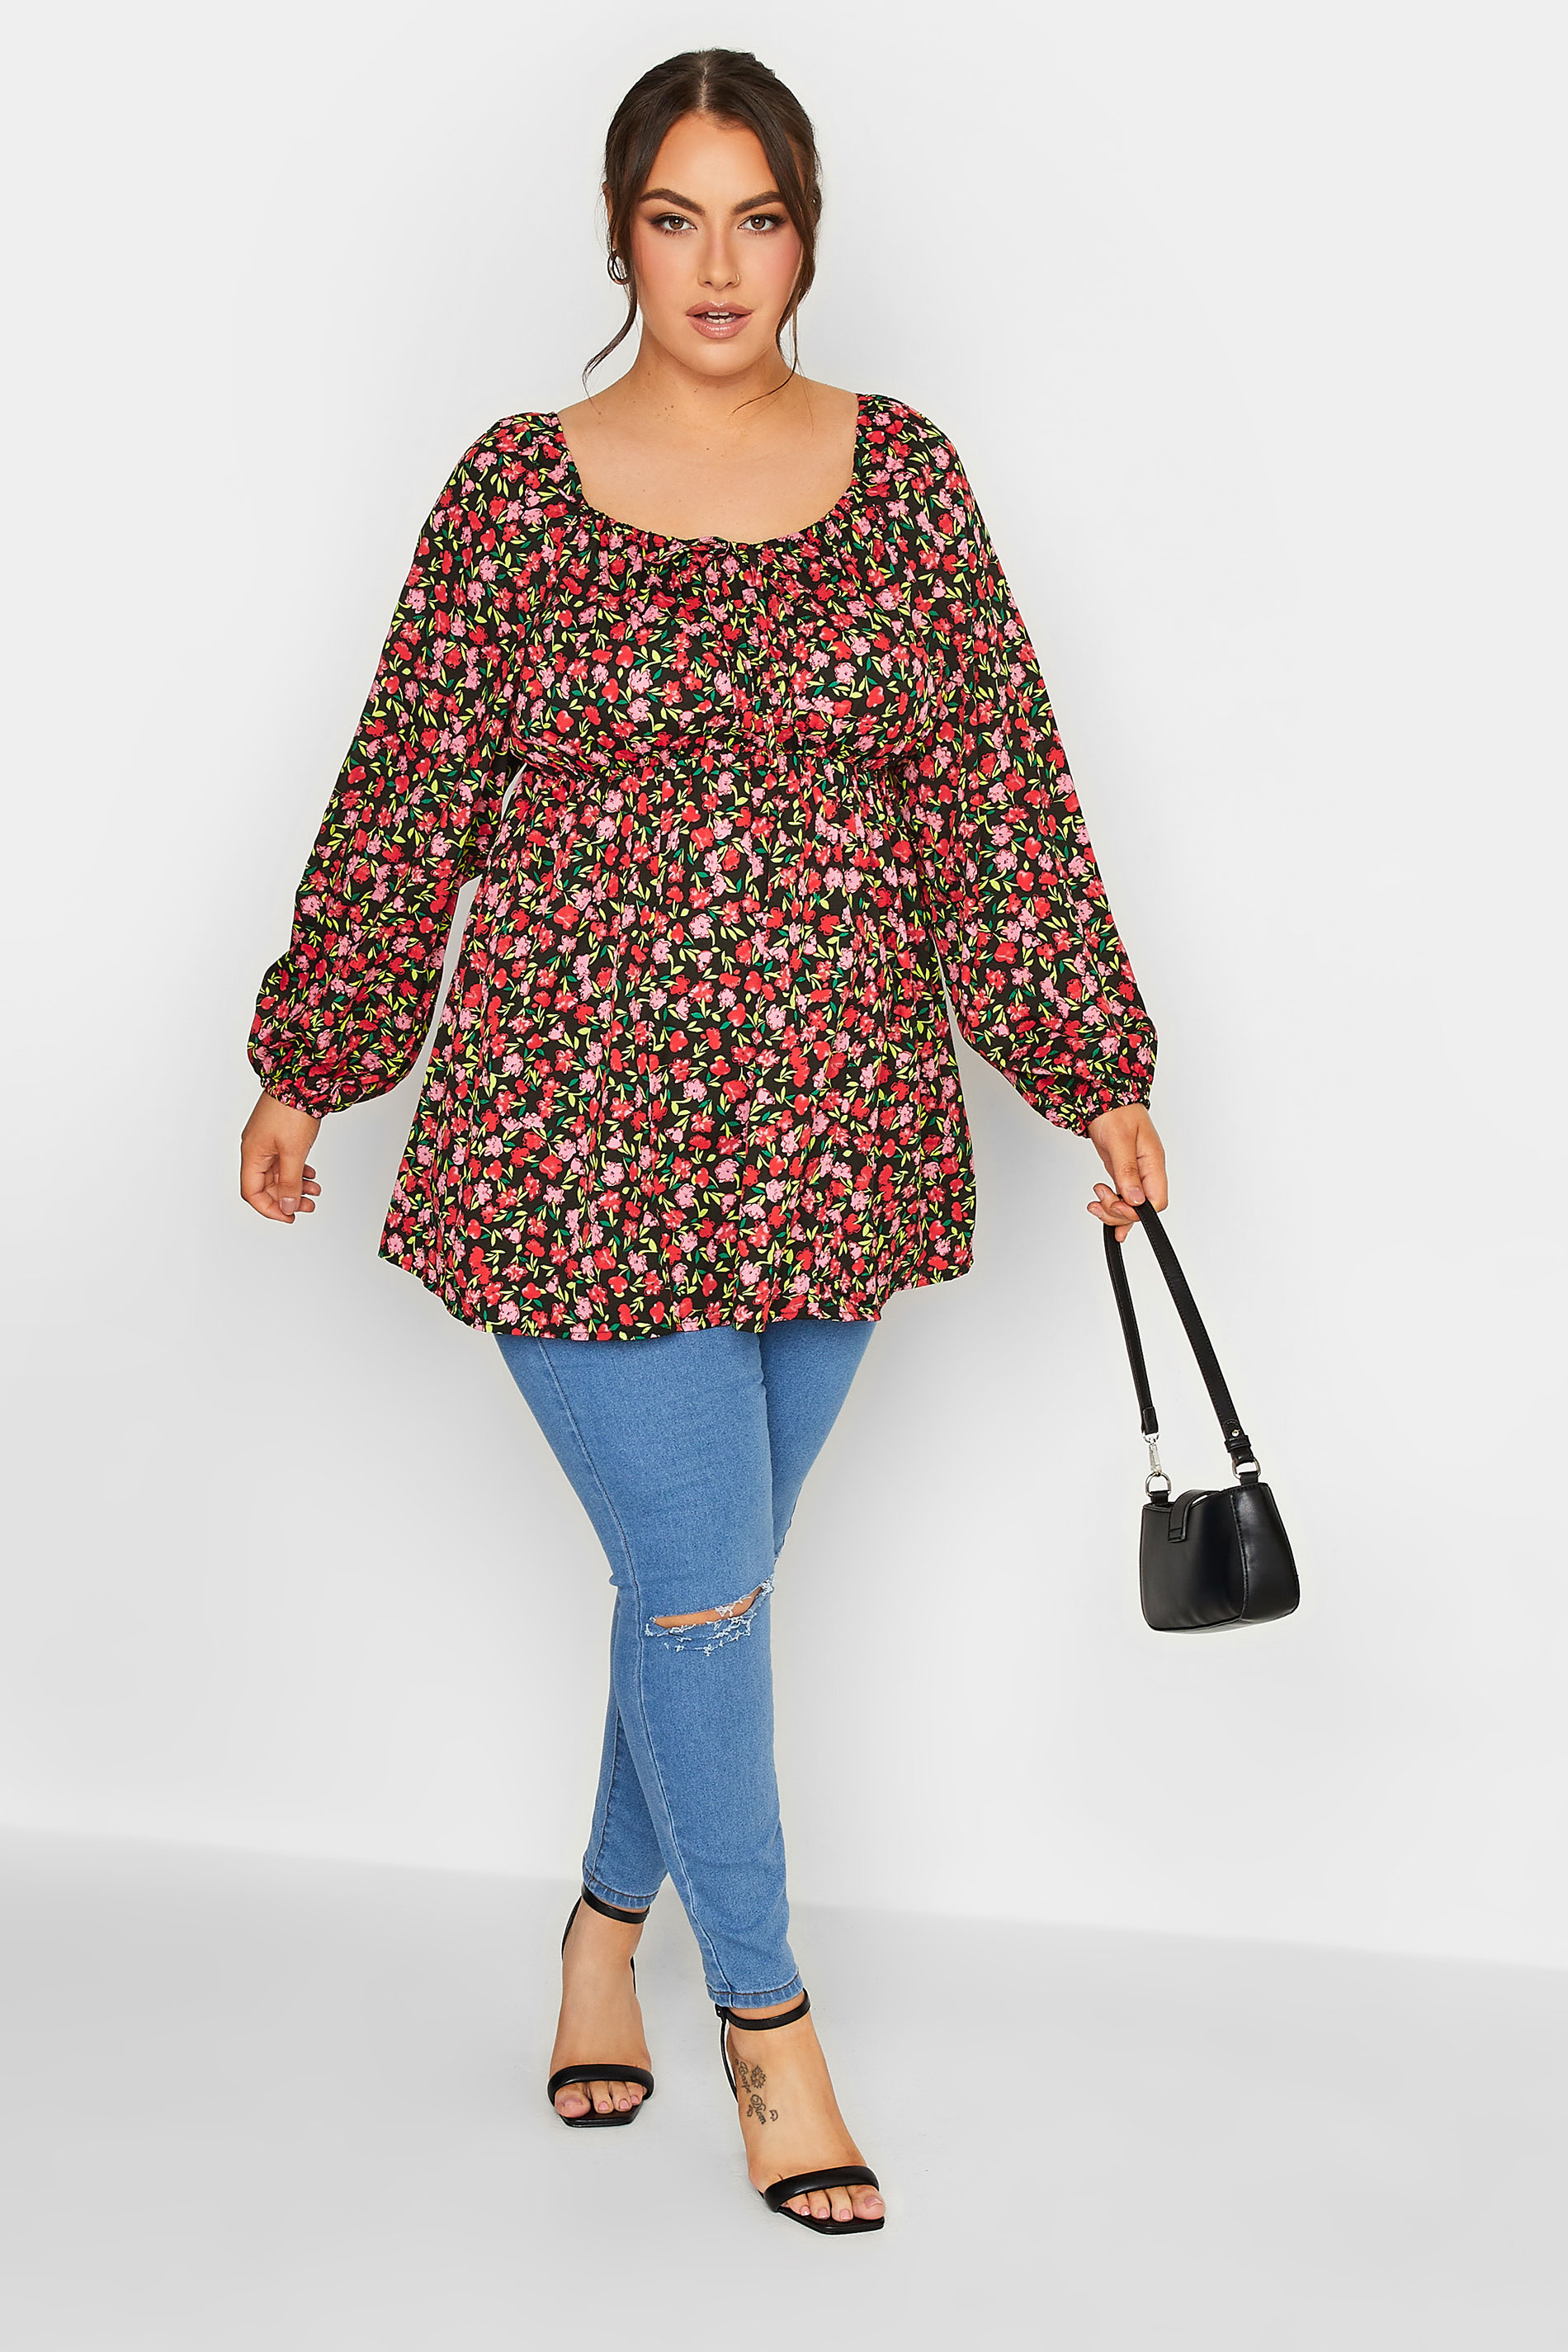 LIMITED COLLECTION Plus Size Black & Pink Floral Gypsy Blouse | Yours Clothing 2